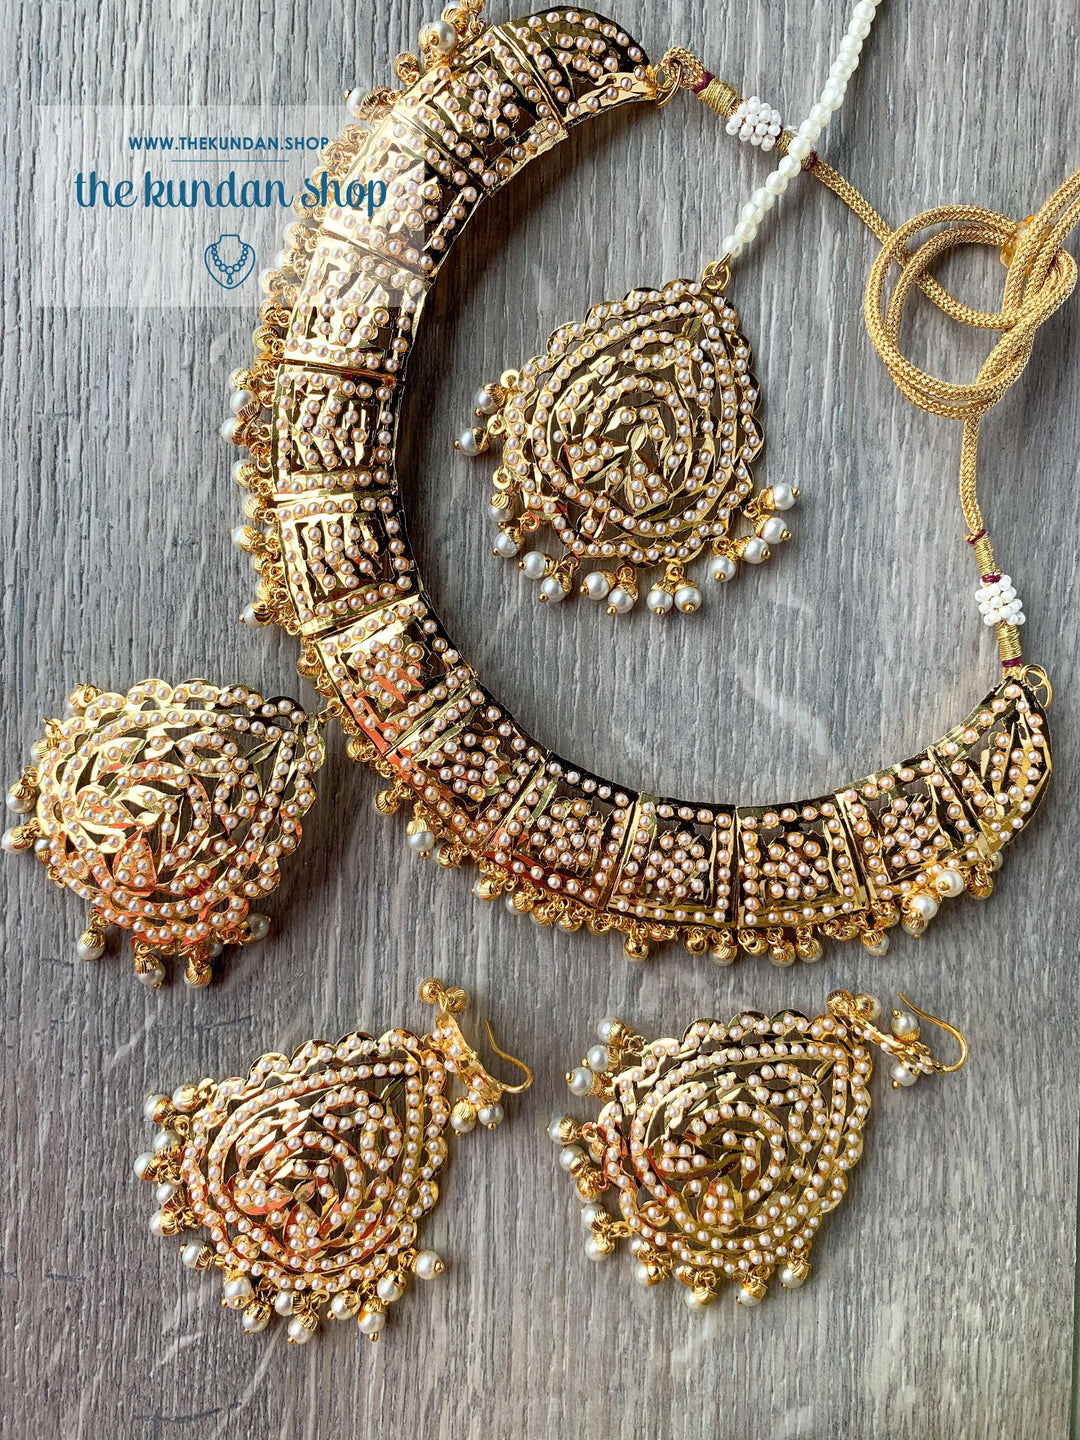 The Perfect Pearl Pendant 2.0 Necklace Sets THE KUNDAN SHOP 